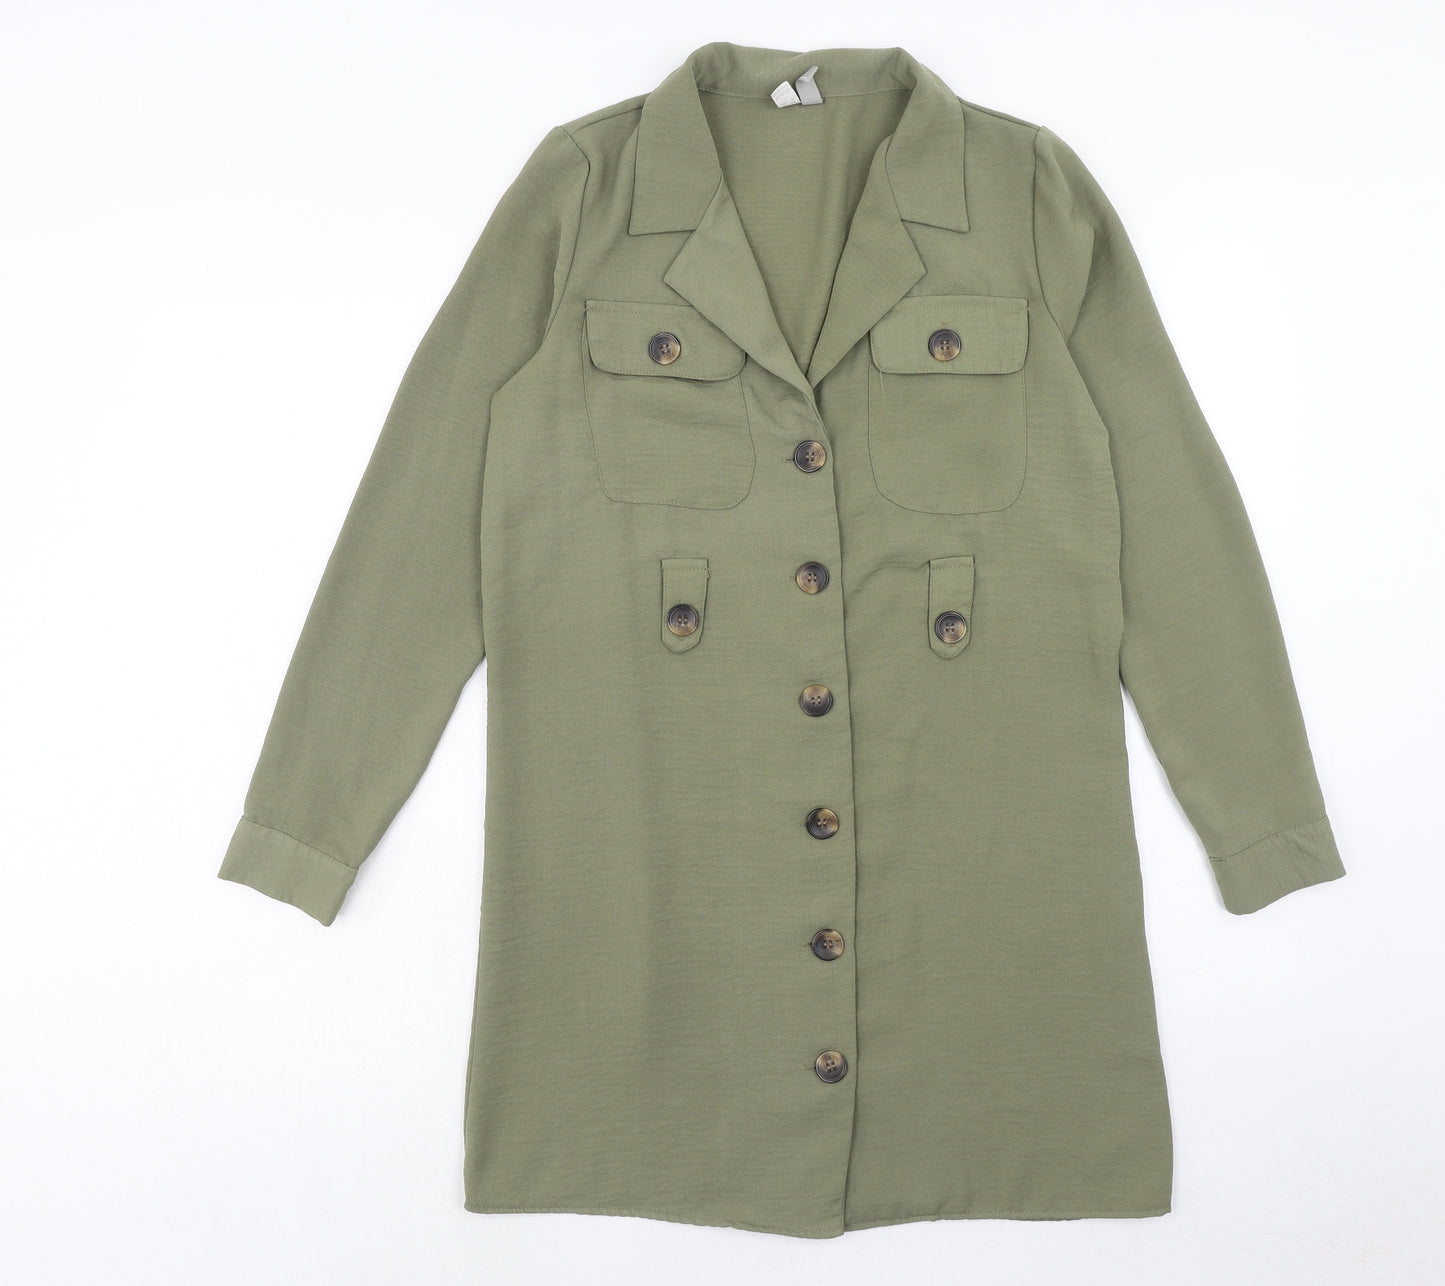 ASOS Womens Green Polyester Jacket Dress Size 6 Collared Button